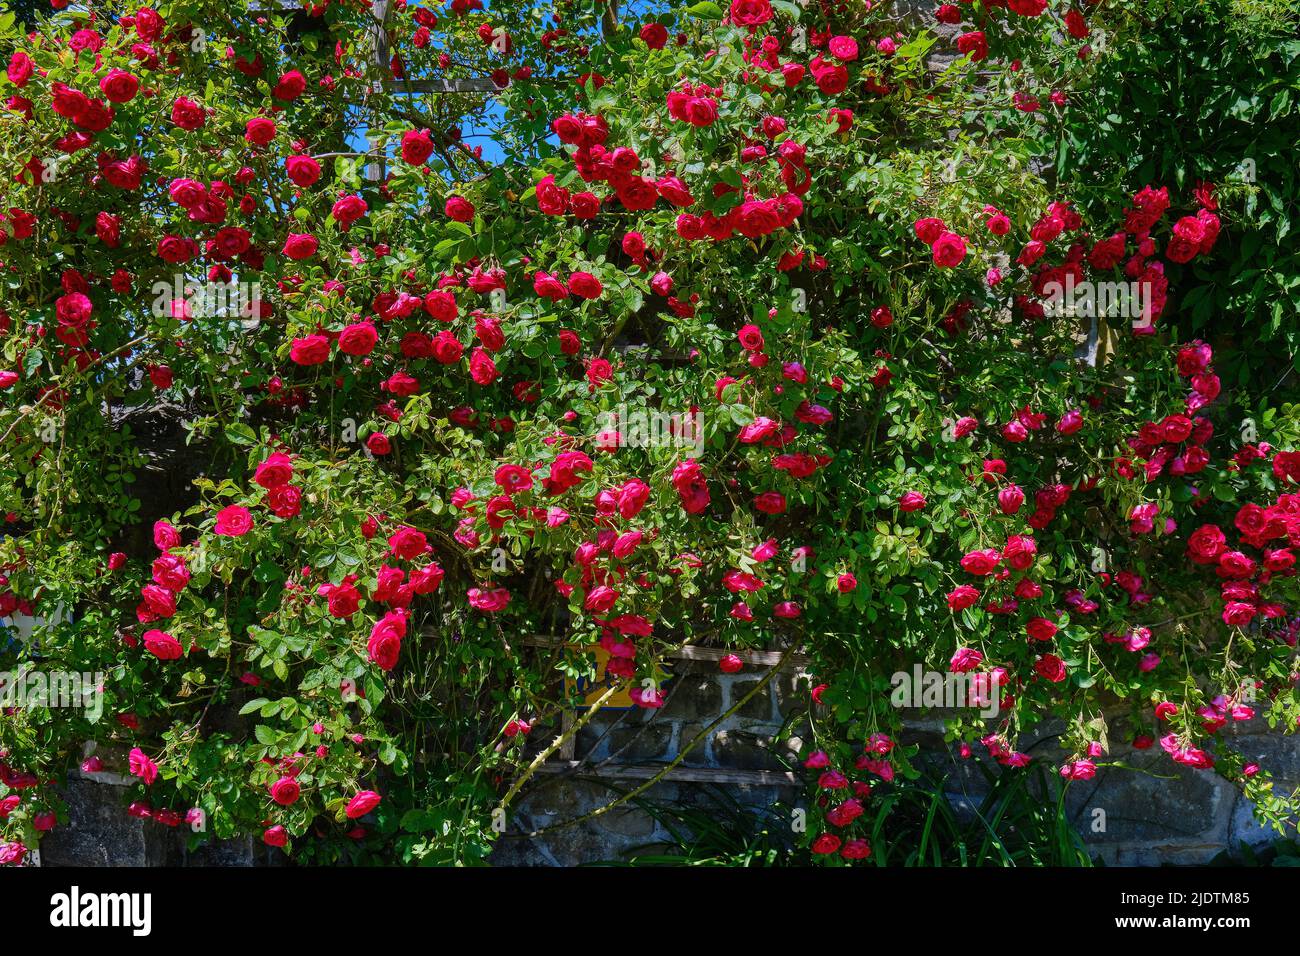 Thorny hedge of wild roses on a trellis against an old castle wall reminiscent of the fairy tale of Sleeping Beauty. Stock Photo